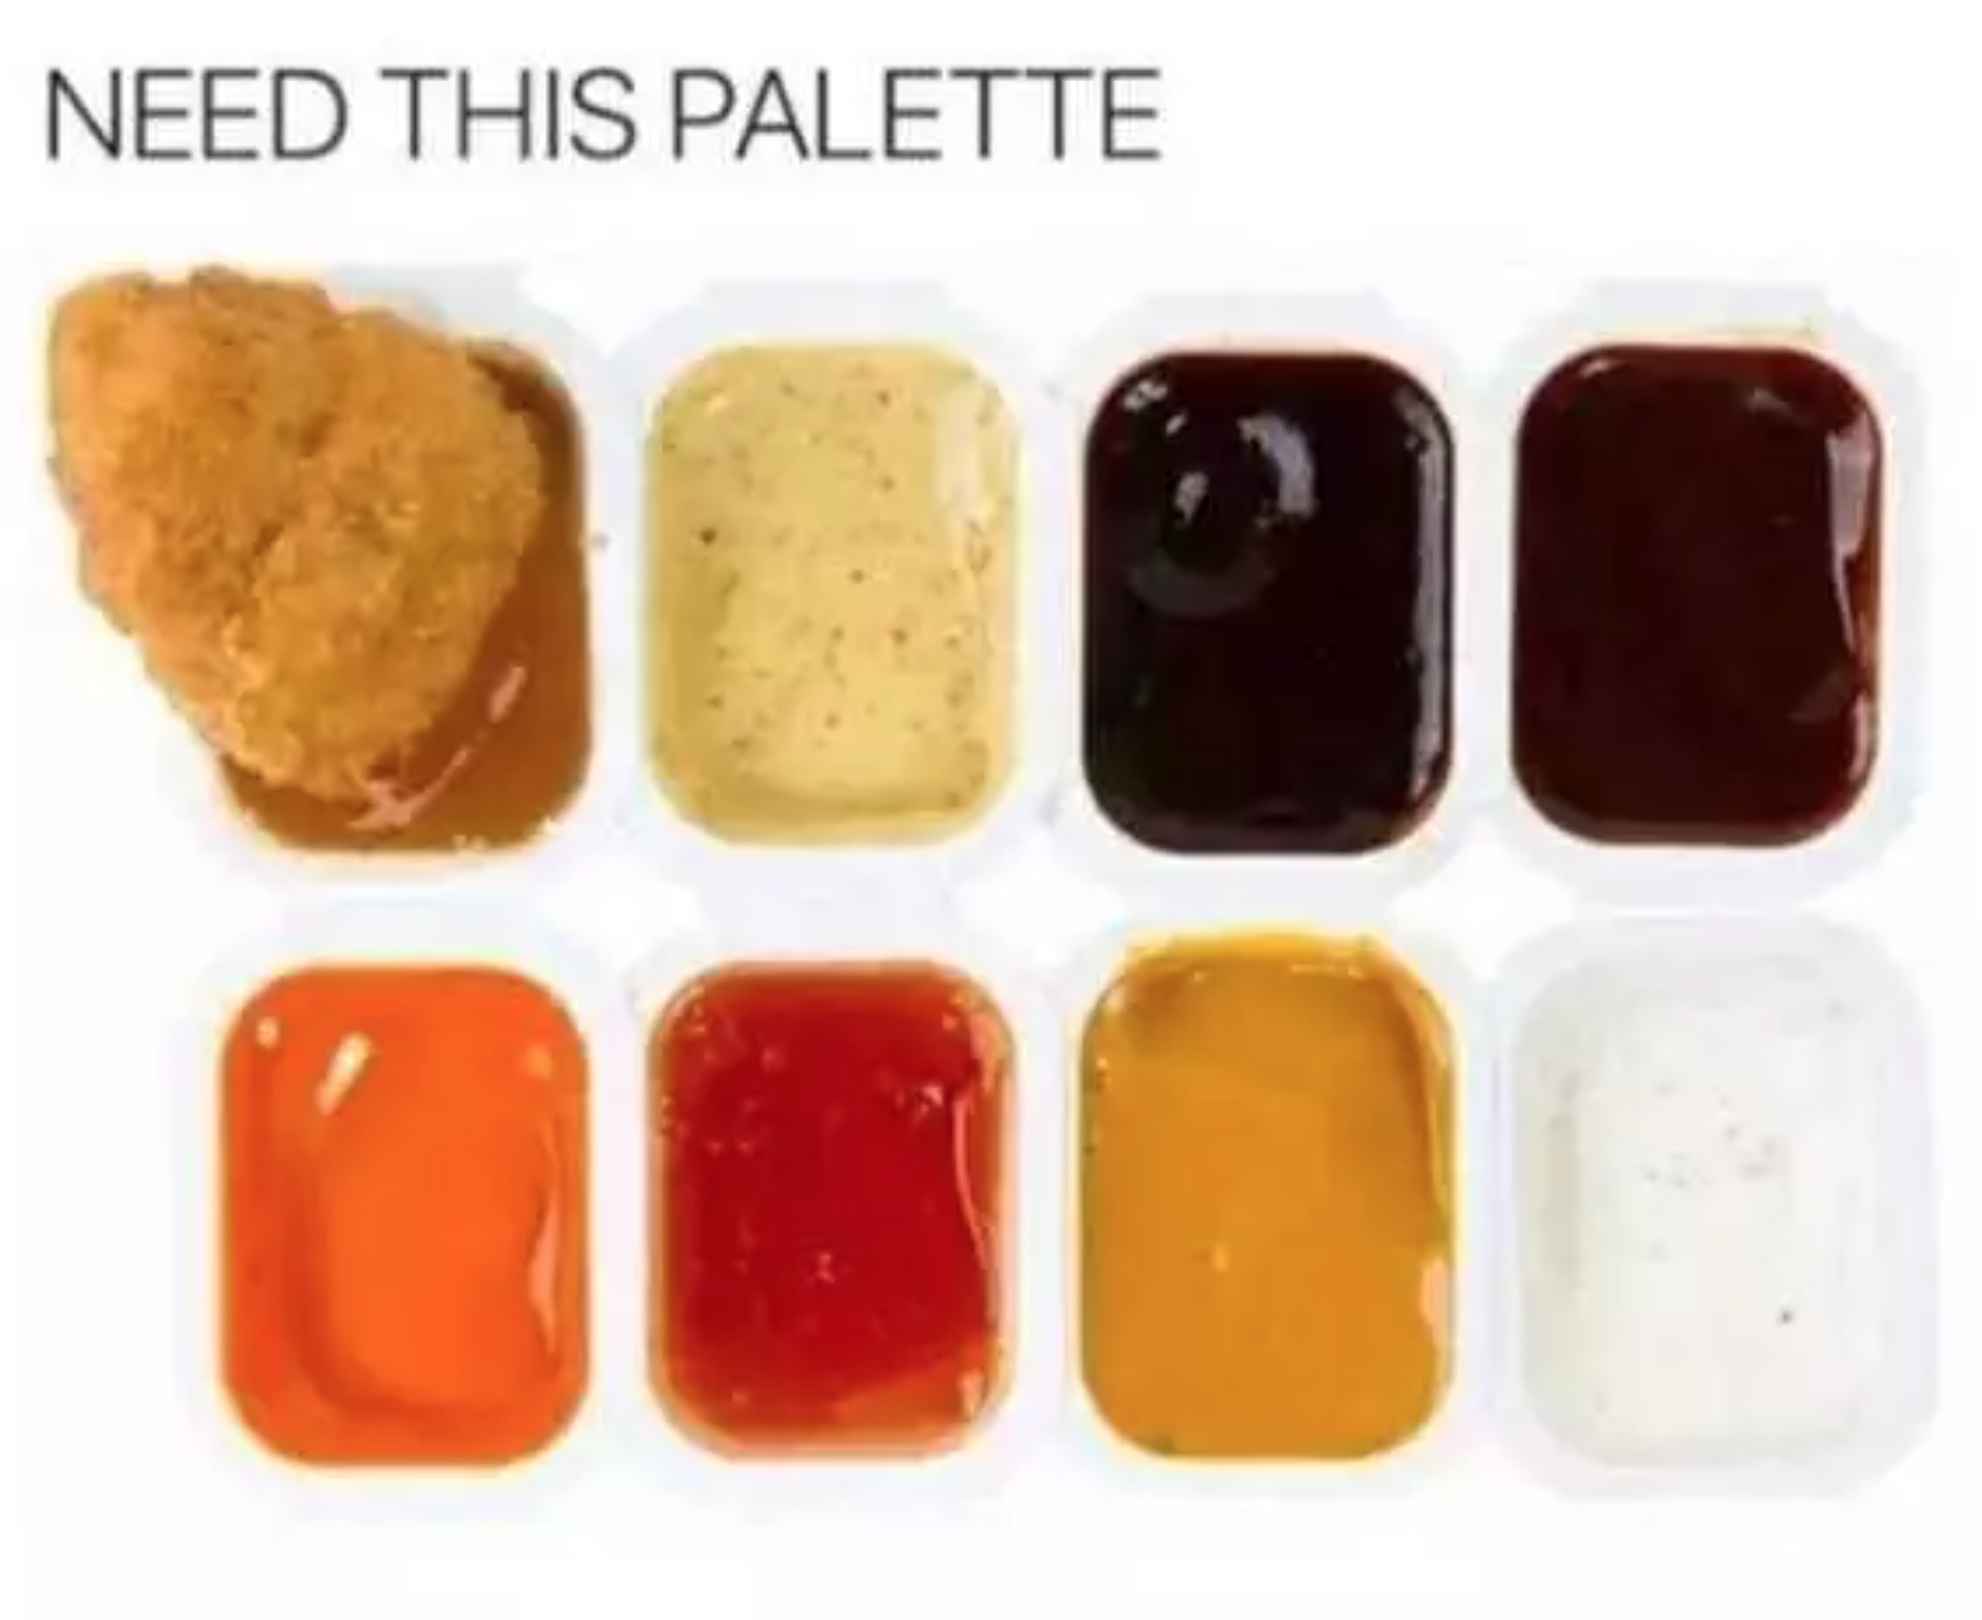 food memes - Need This Palette